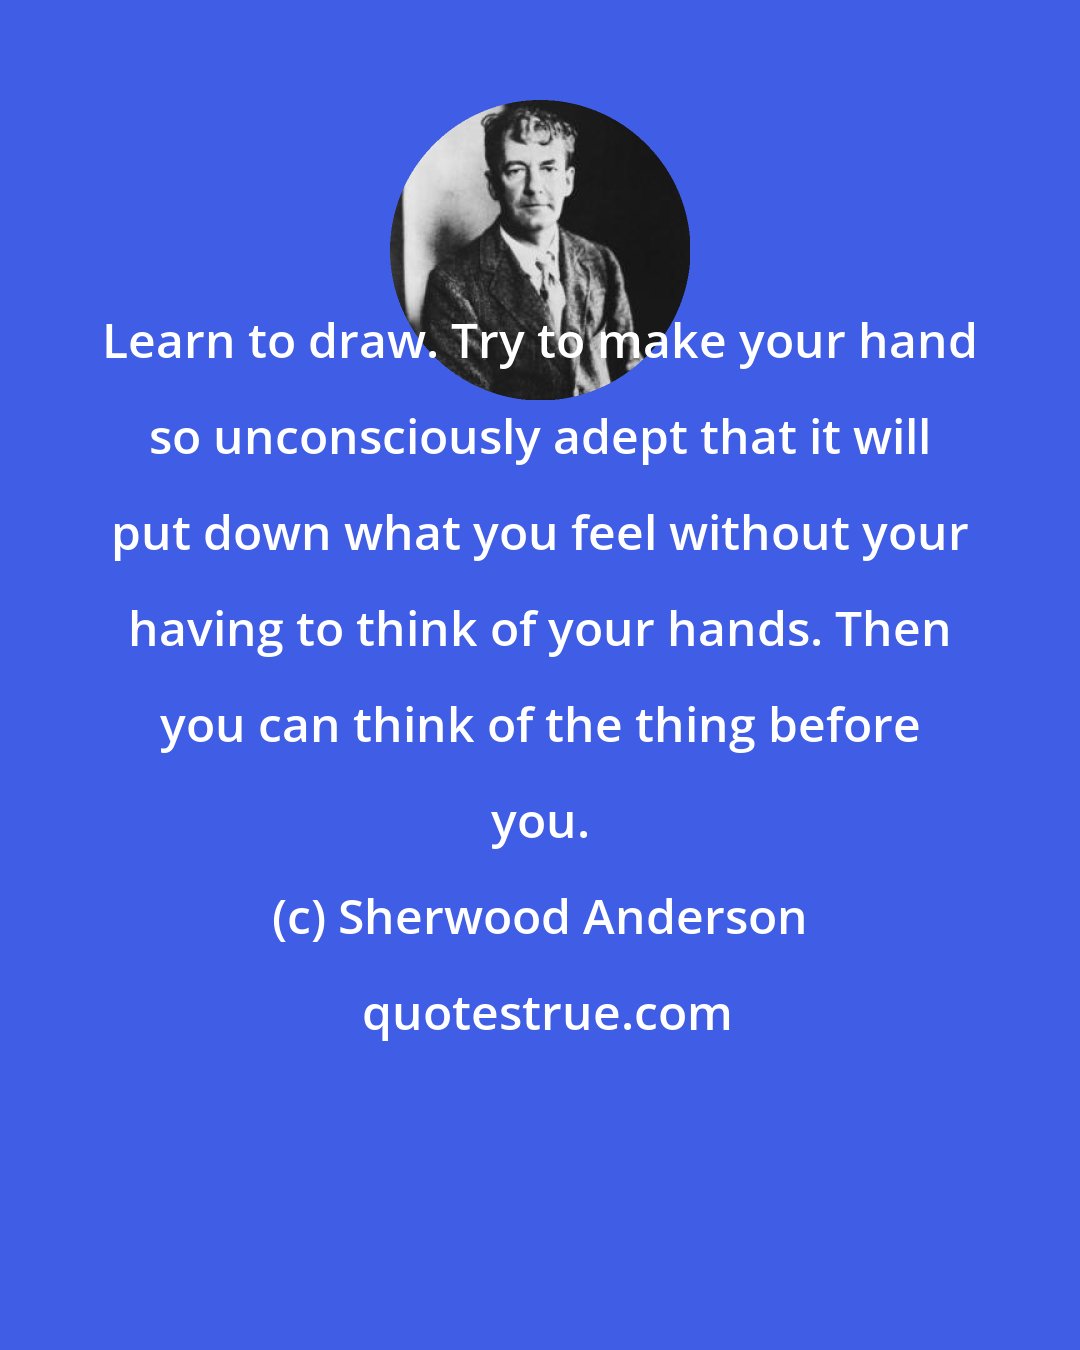 Sherwood Anderson: Learn to draw. Try to make your hand so unconsciously adept that it will put down what you feel without your having to think of your hands. Then you can think of the thing before you.